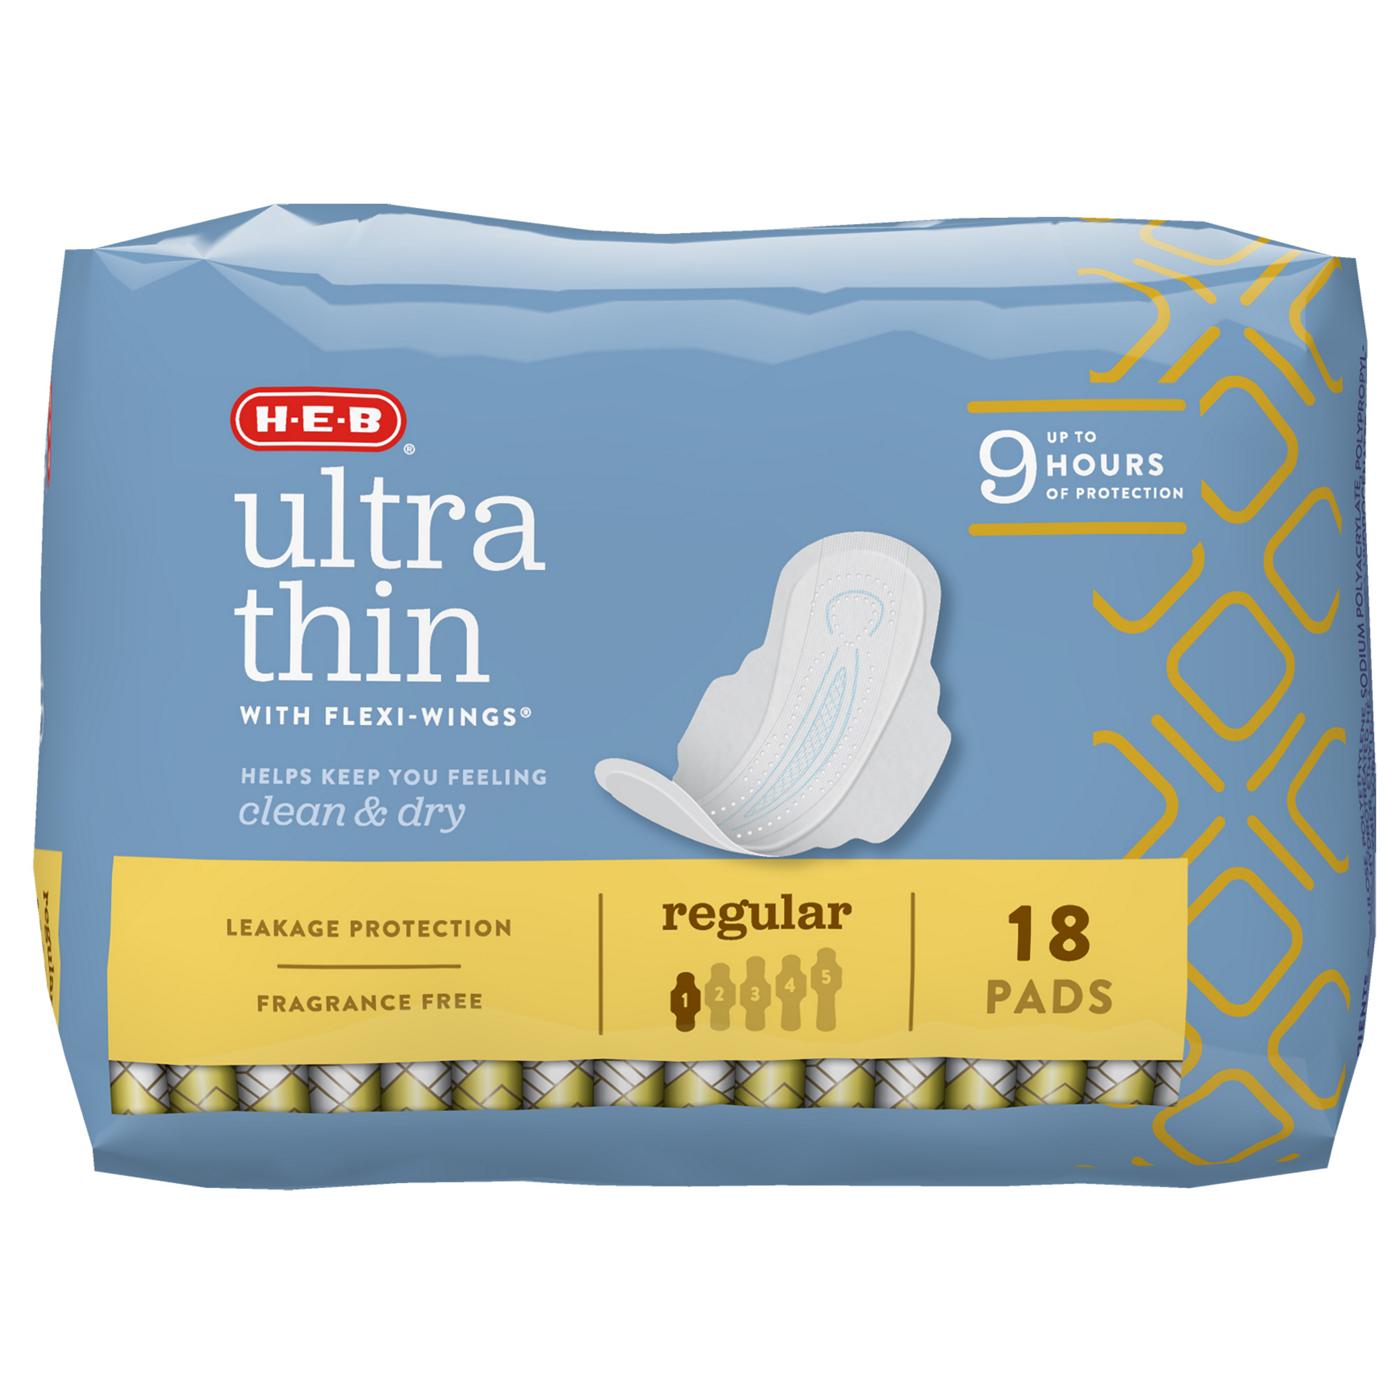 H-E-B Ultra Thin with Flexi-Wings Pads - Regular; image 1 of 7